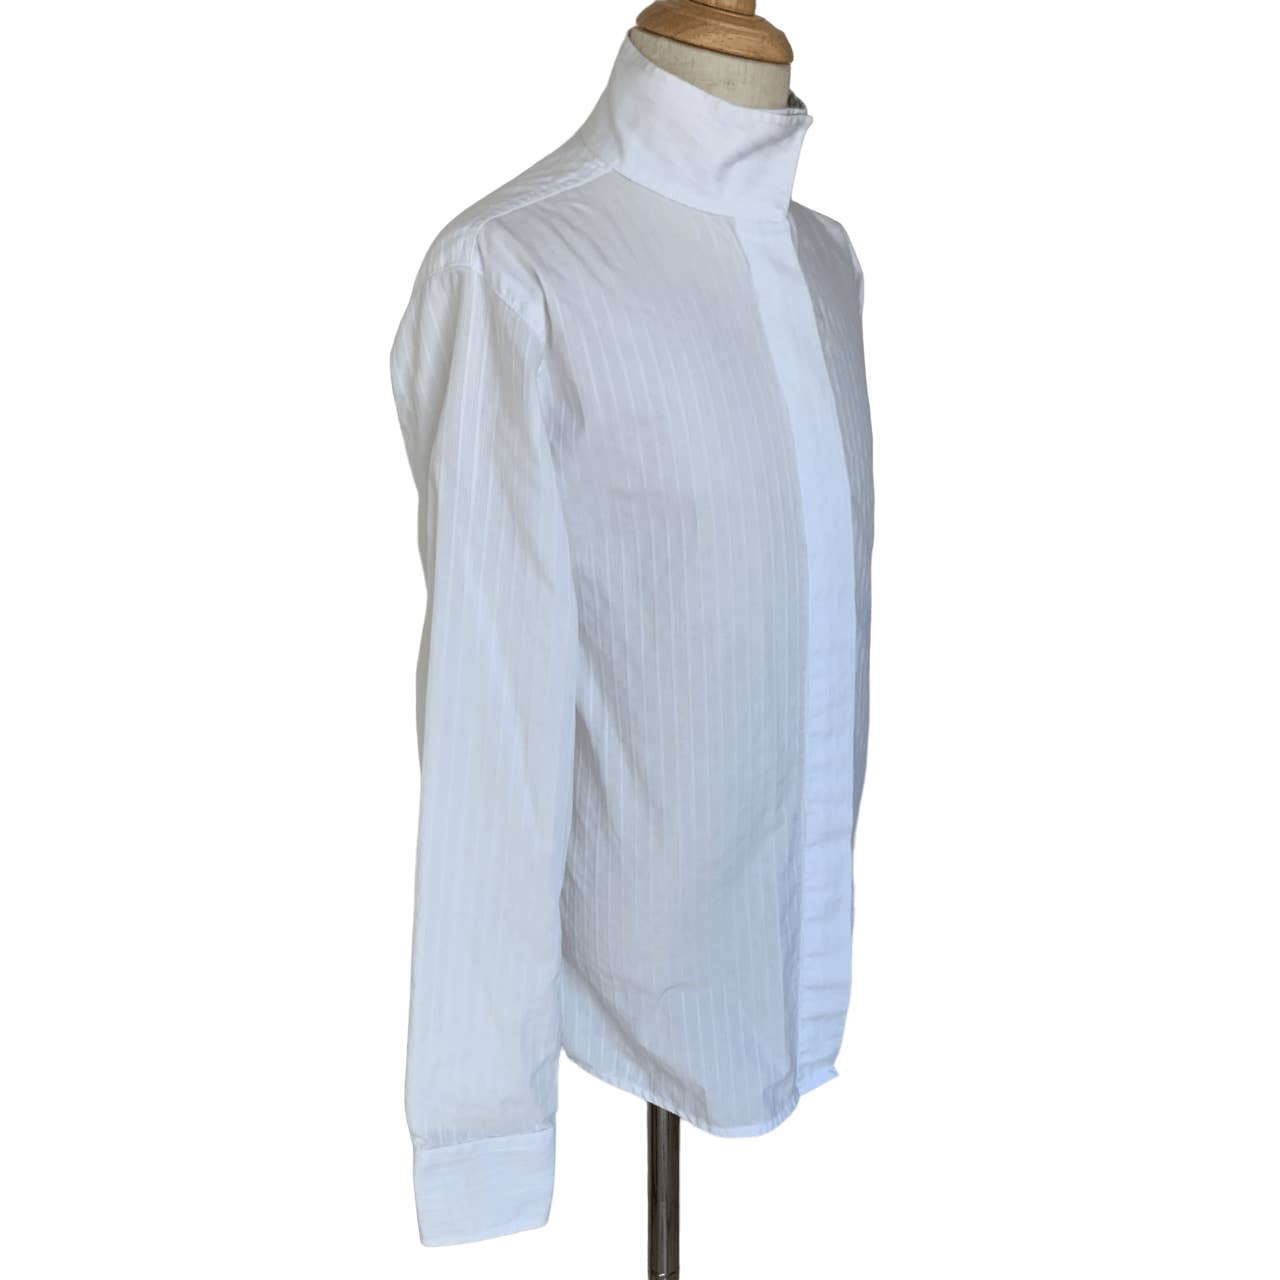 R.J. Classics 'Essential Collection' Show Shirt in White - Youth 12